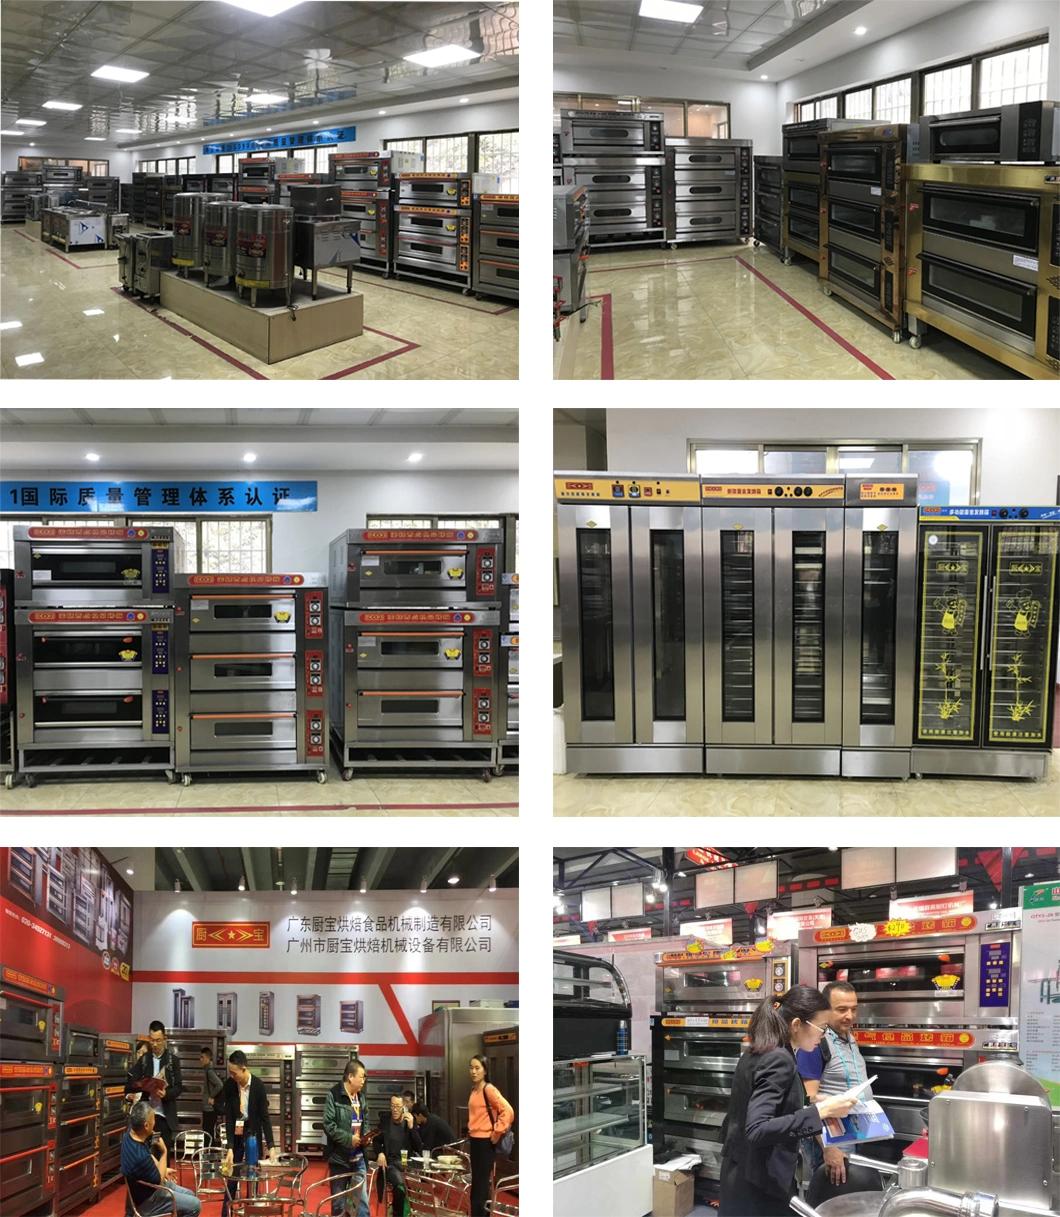 3 Deck 6 Trays Electric Pizza Oven for Commercial Kitchen Baking Equipment Bakery Machinery Food Machine